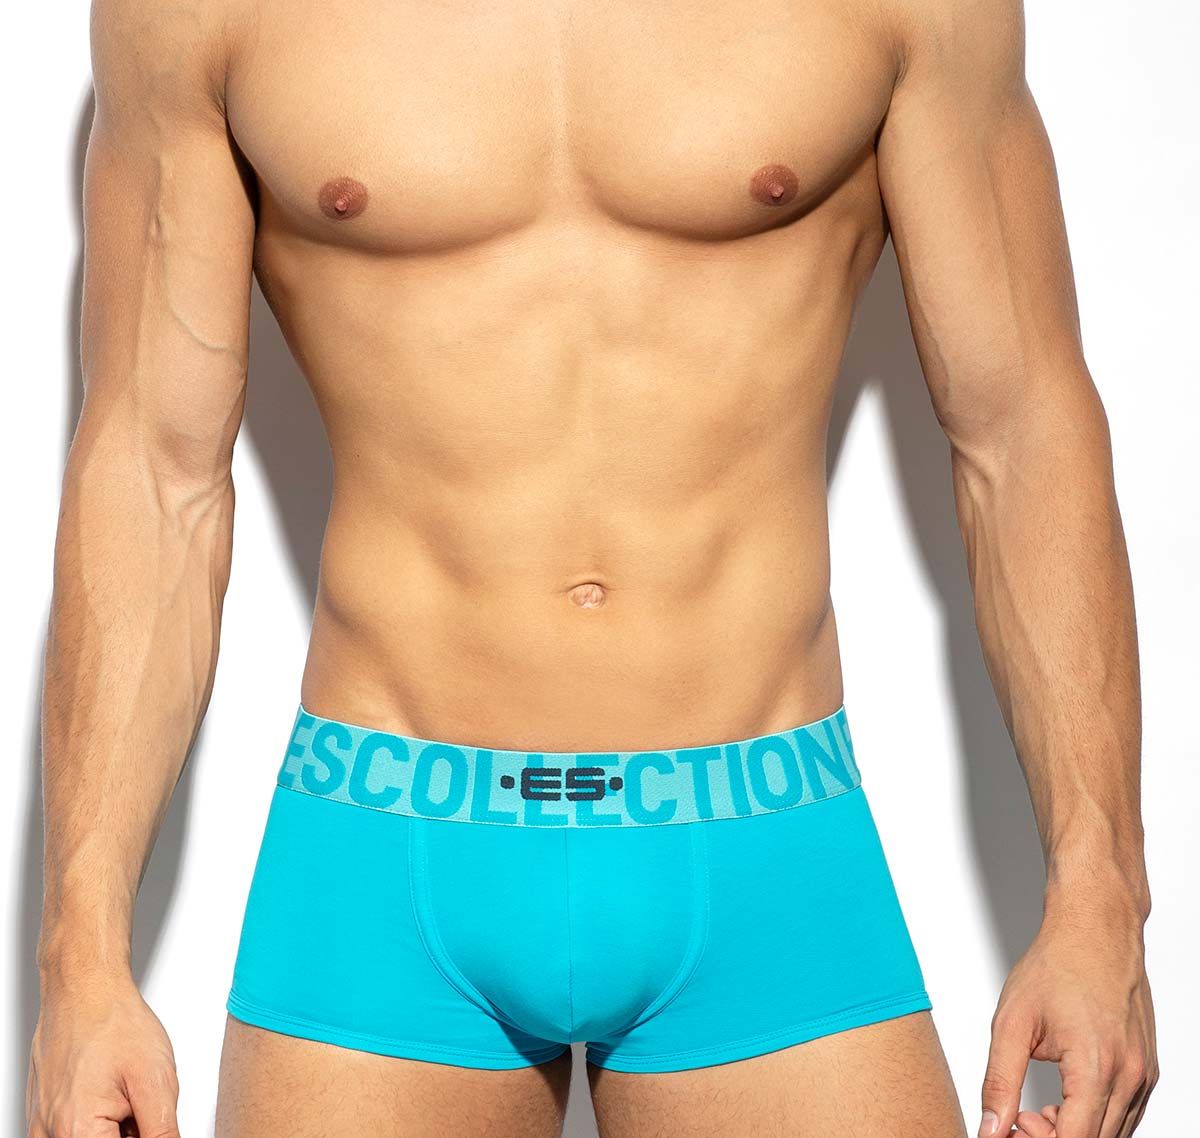 ES Collection ondergoed boxer 7 DAYS 7 COLORS TRUNK UN488, turquoise